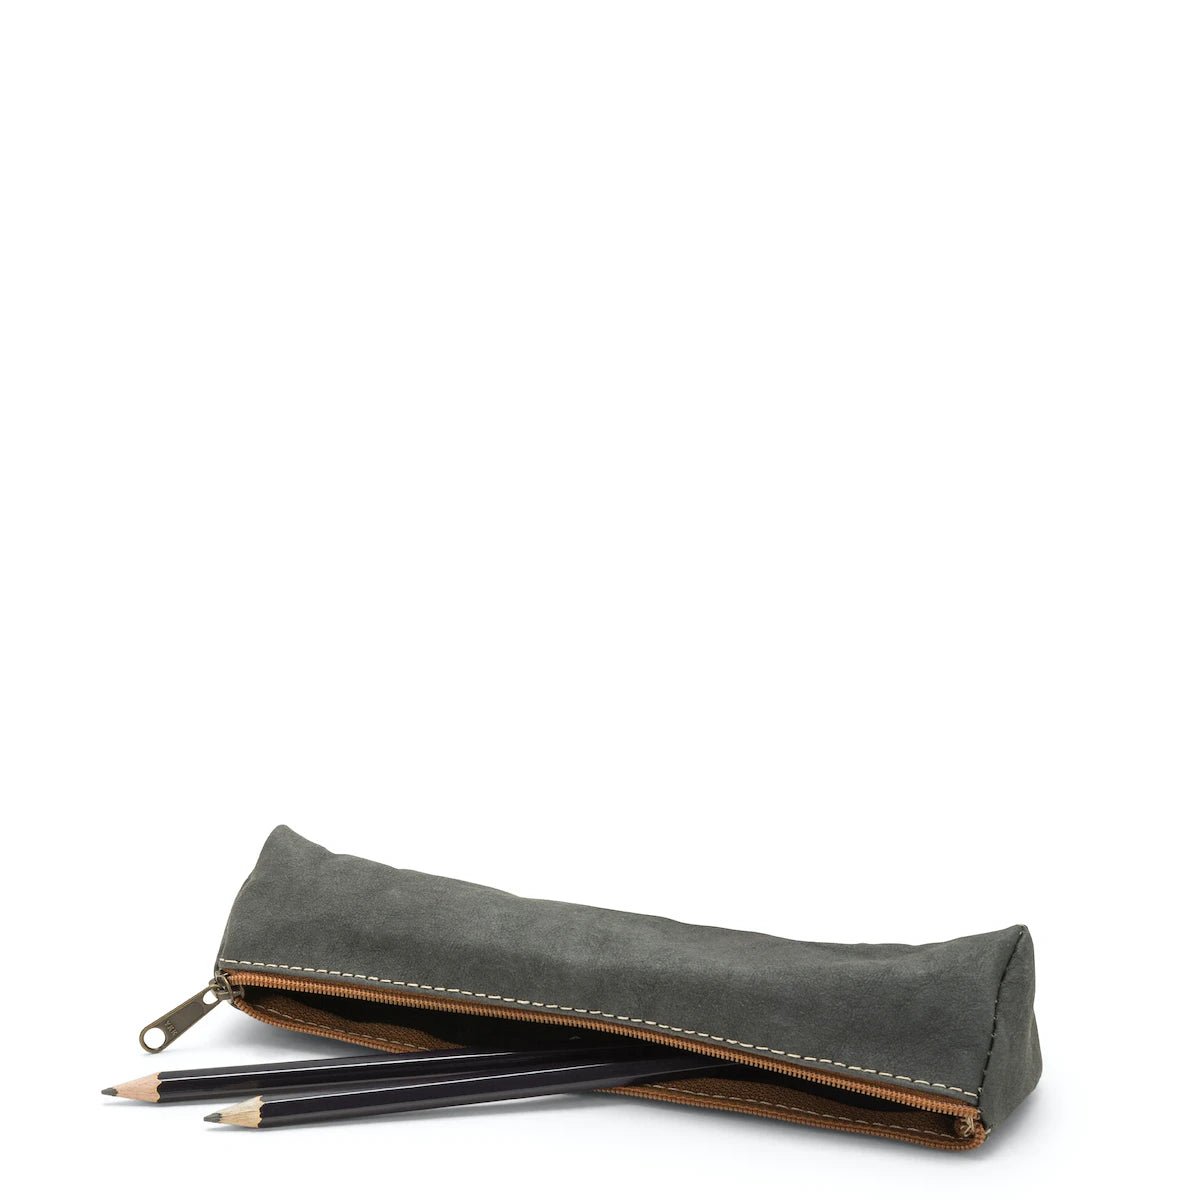 A washable paper pencil case is shown on its side with two pencils spilling out. The pencil case is dark grey in colour and has a metal zip closure.